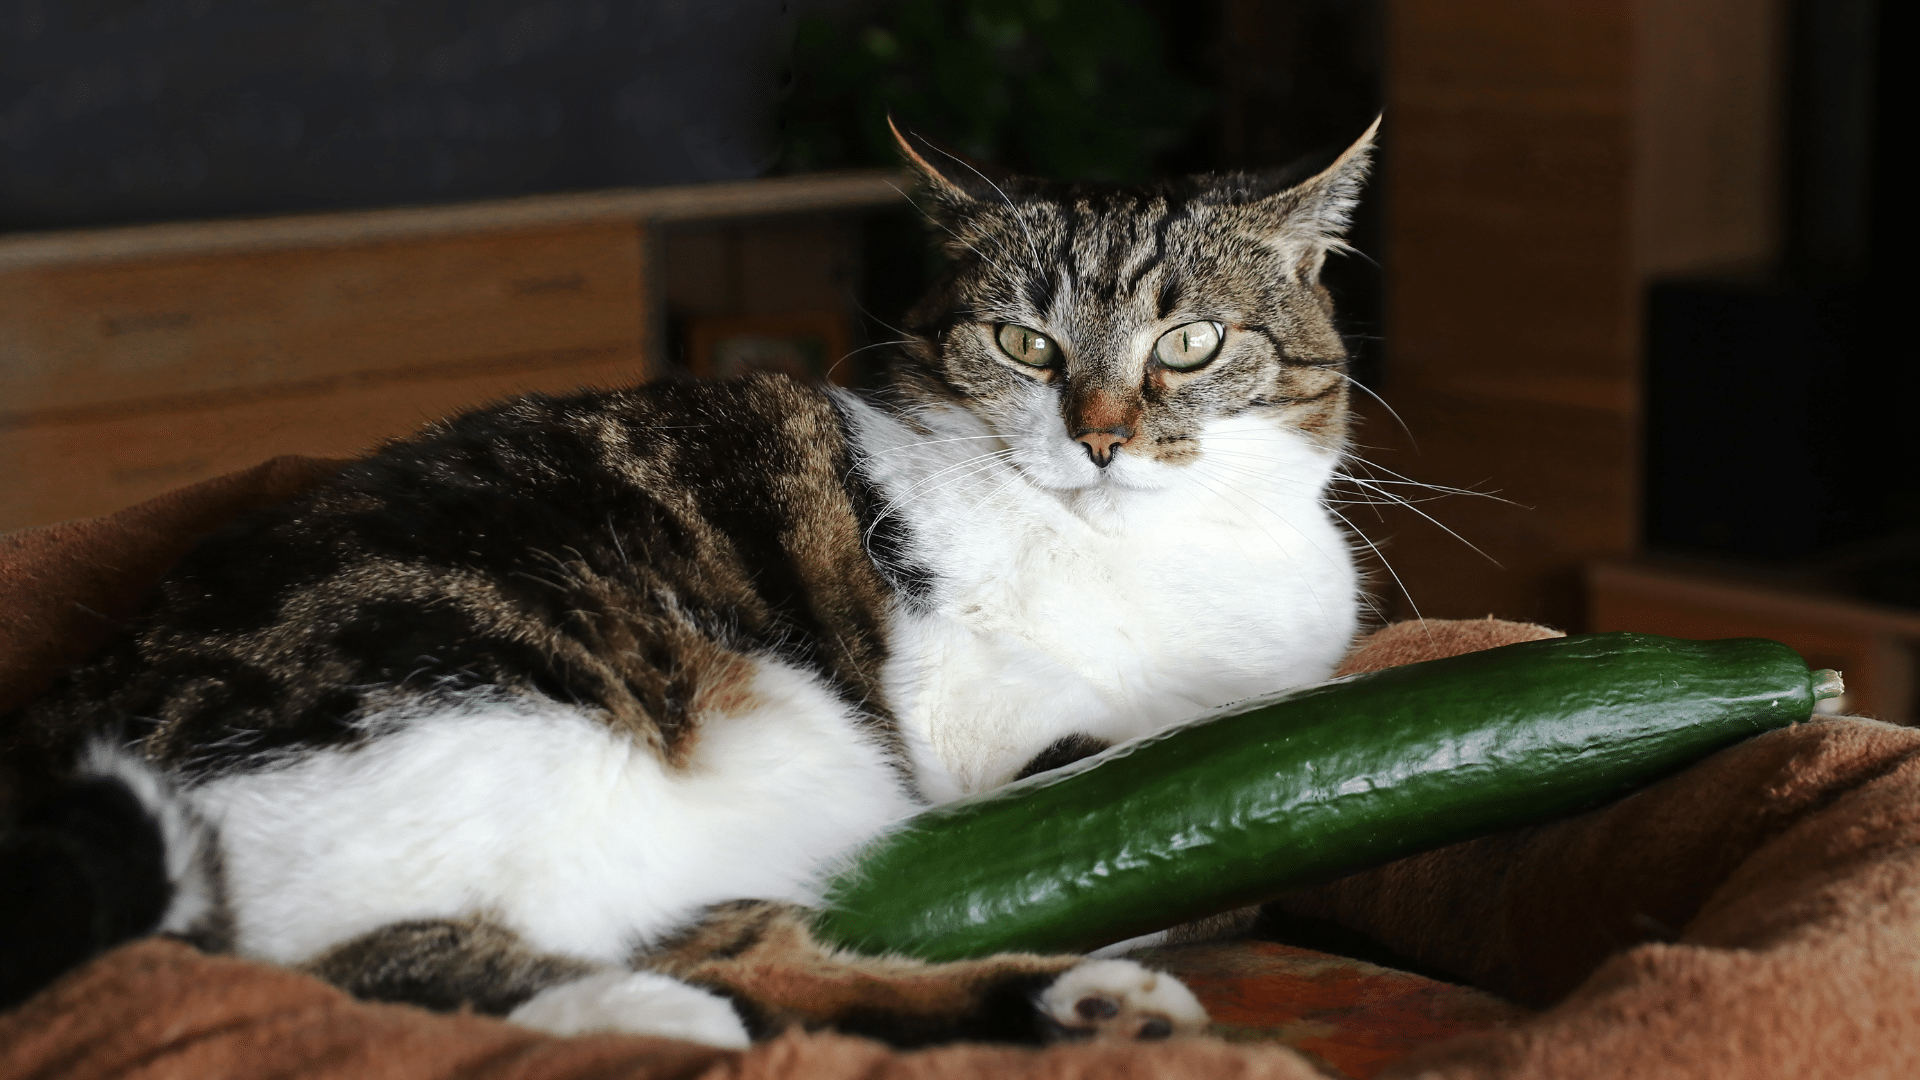 Why are cats afraid of cucumbers